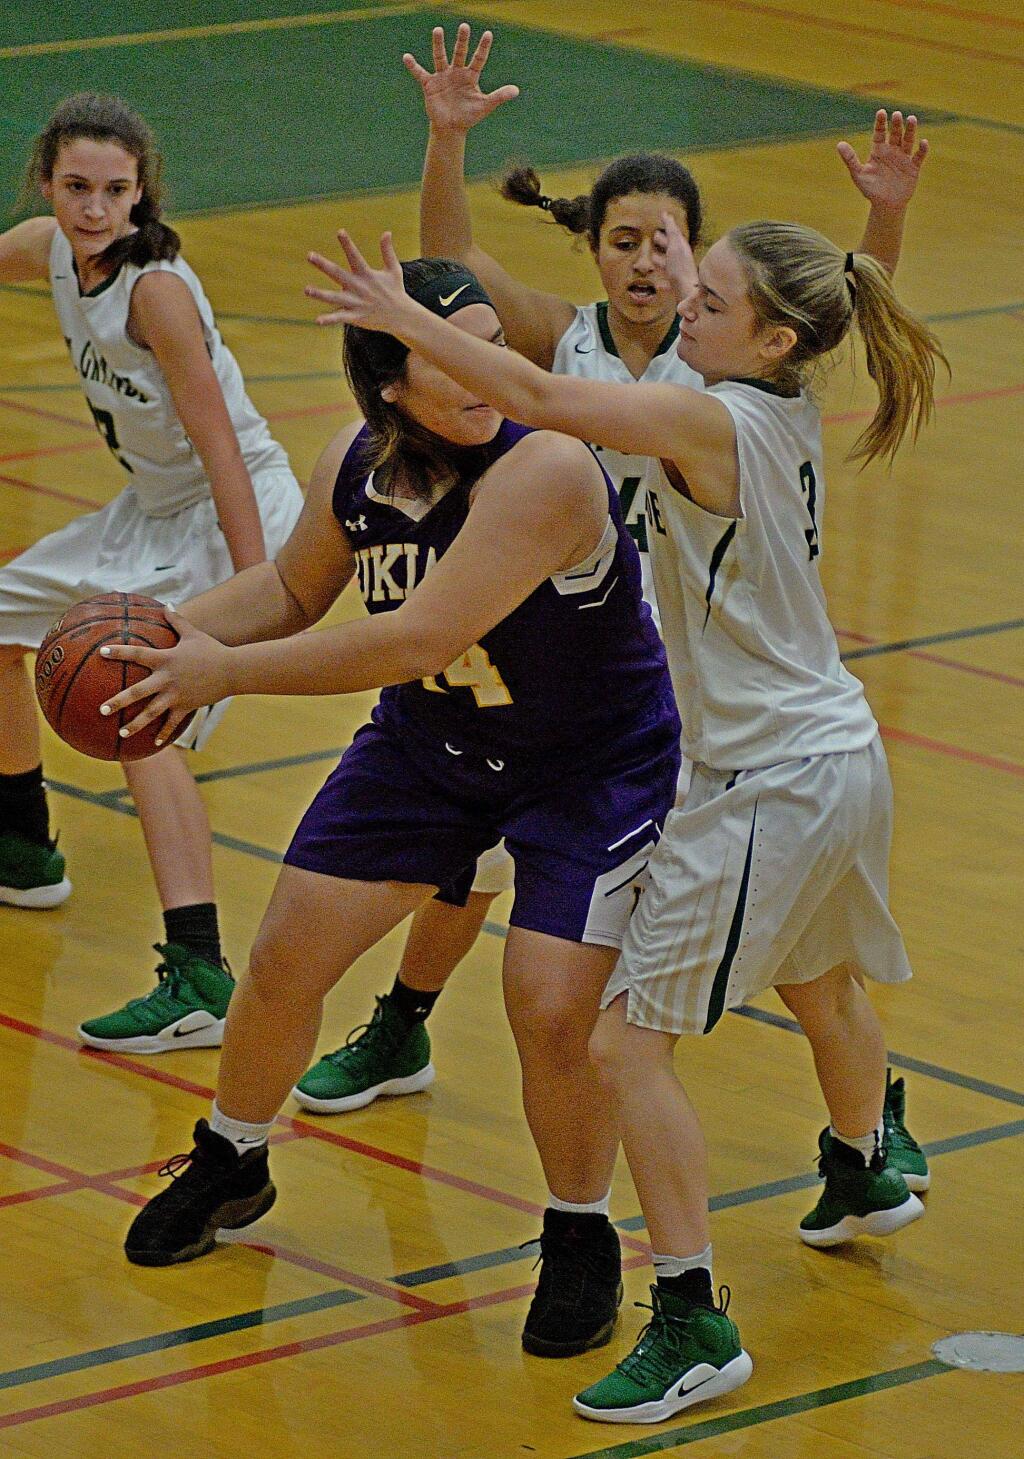 SUMNER FOWLER/FOR THE ARGUS-COURIERCasa Grande defenders surround Ukiah ball handler. Casa's aggressive defense contributed to a 51-46 victory.